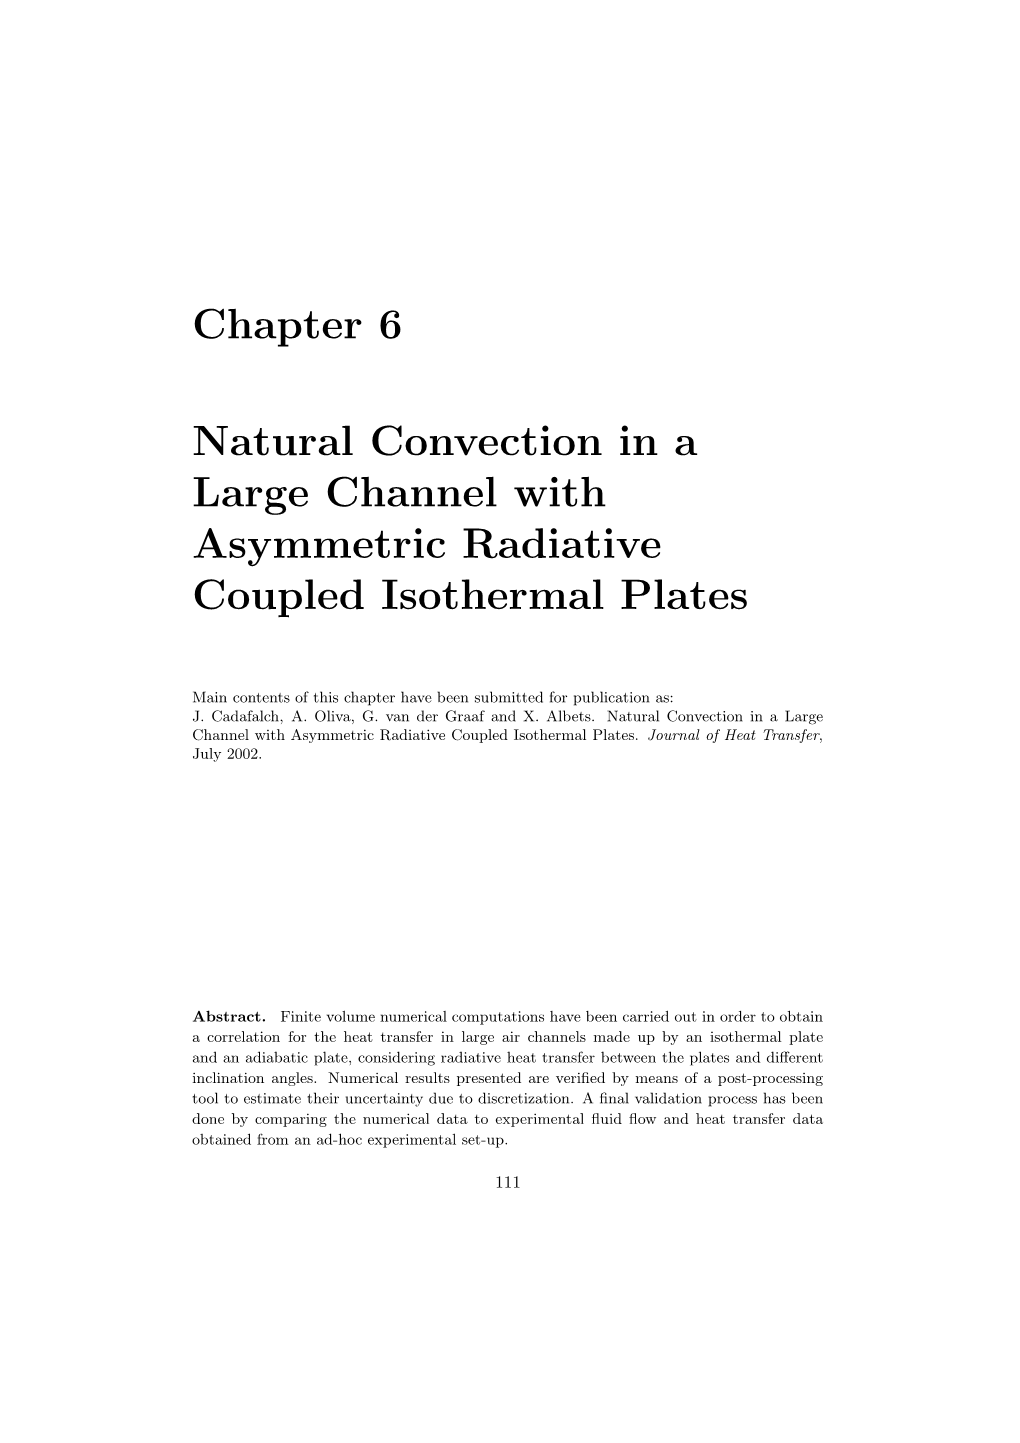 Chapter 6 Natural Convection in a Large Channel with Asymmetric